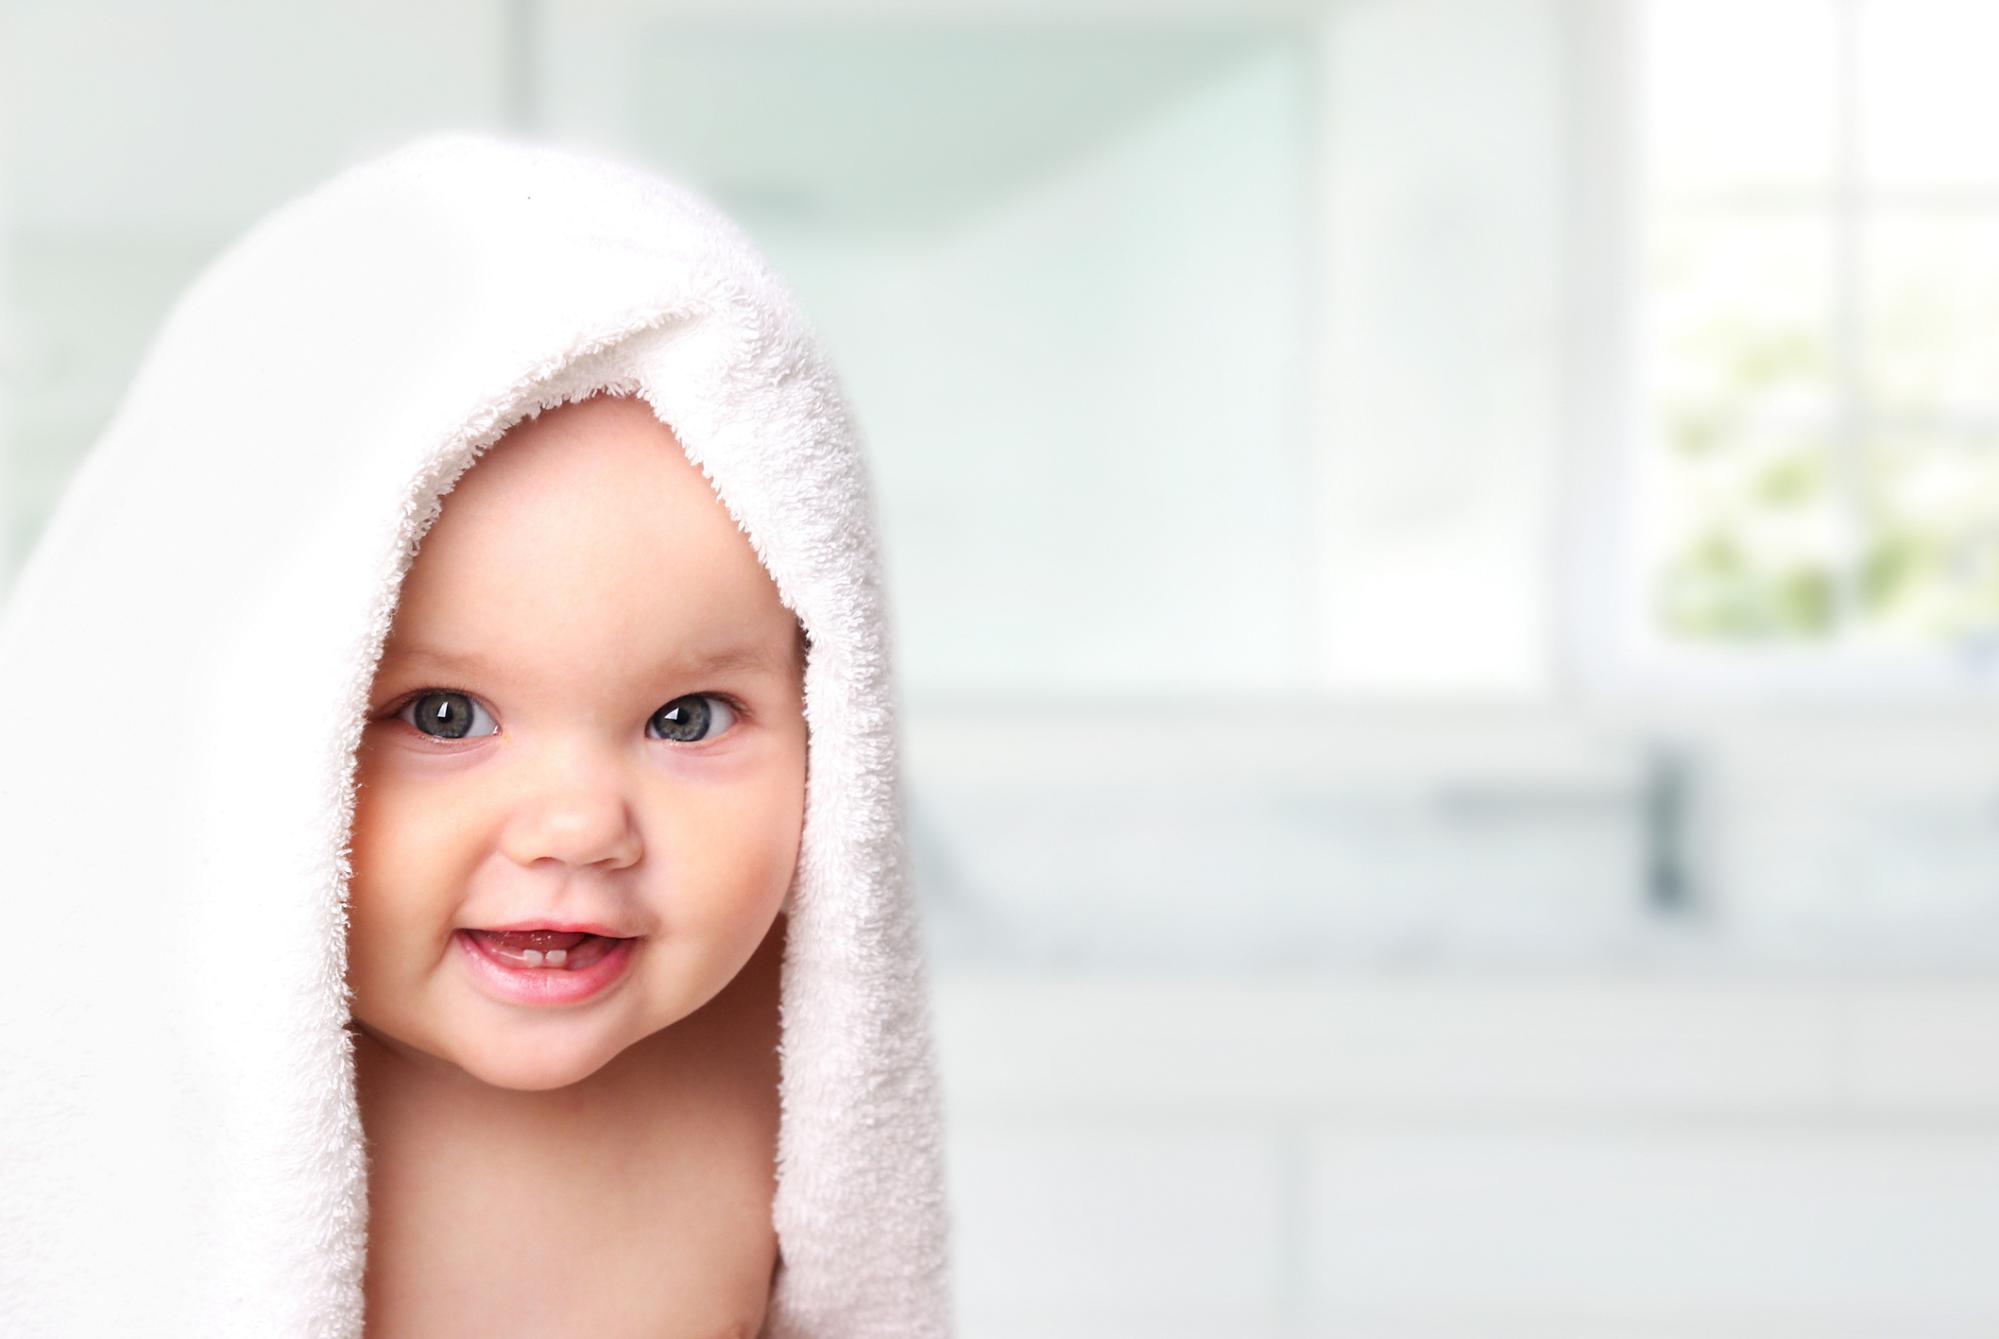 Top 5 Baby Skin Care Tips In 2019 ⋆ The Stuff of Success